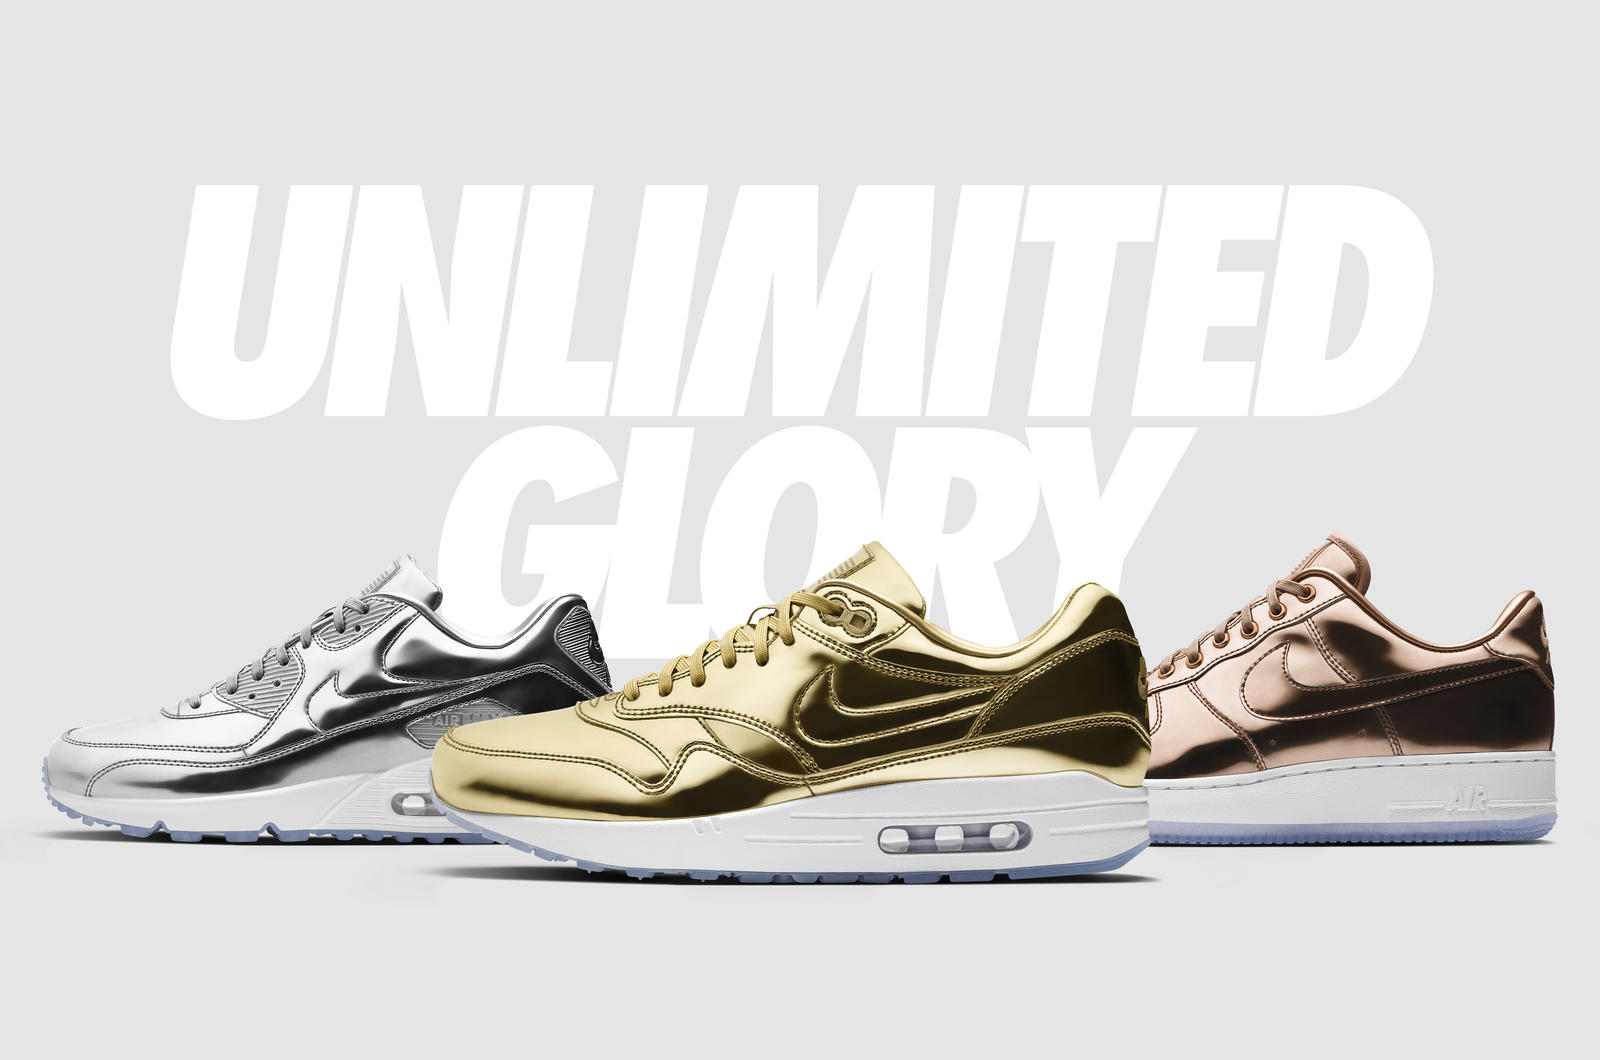 Extra 25% Off UNLIMITED GLORY On Sale @ Nike Store